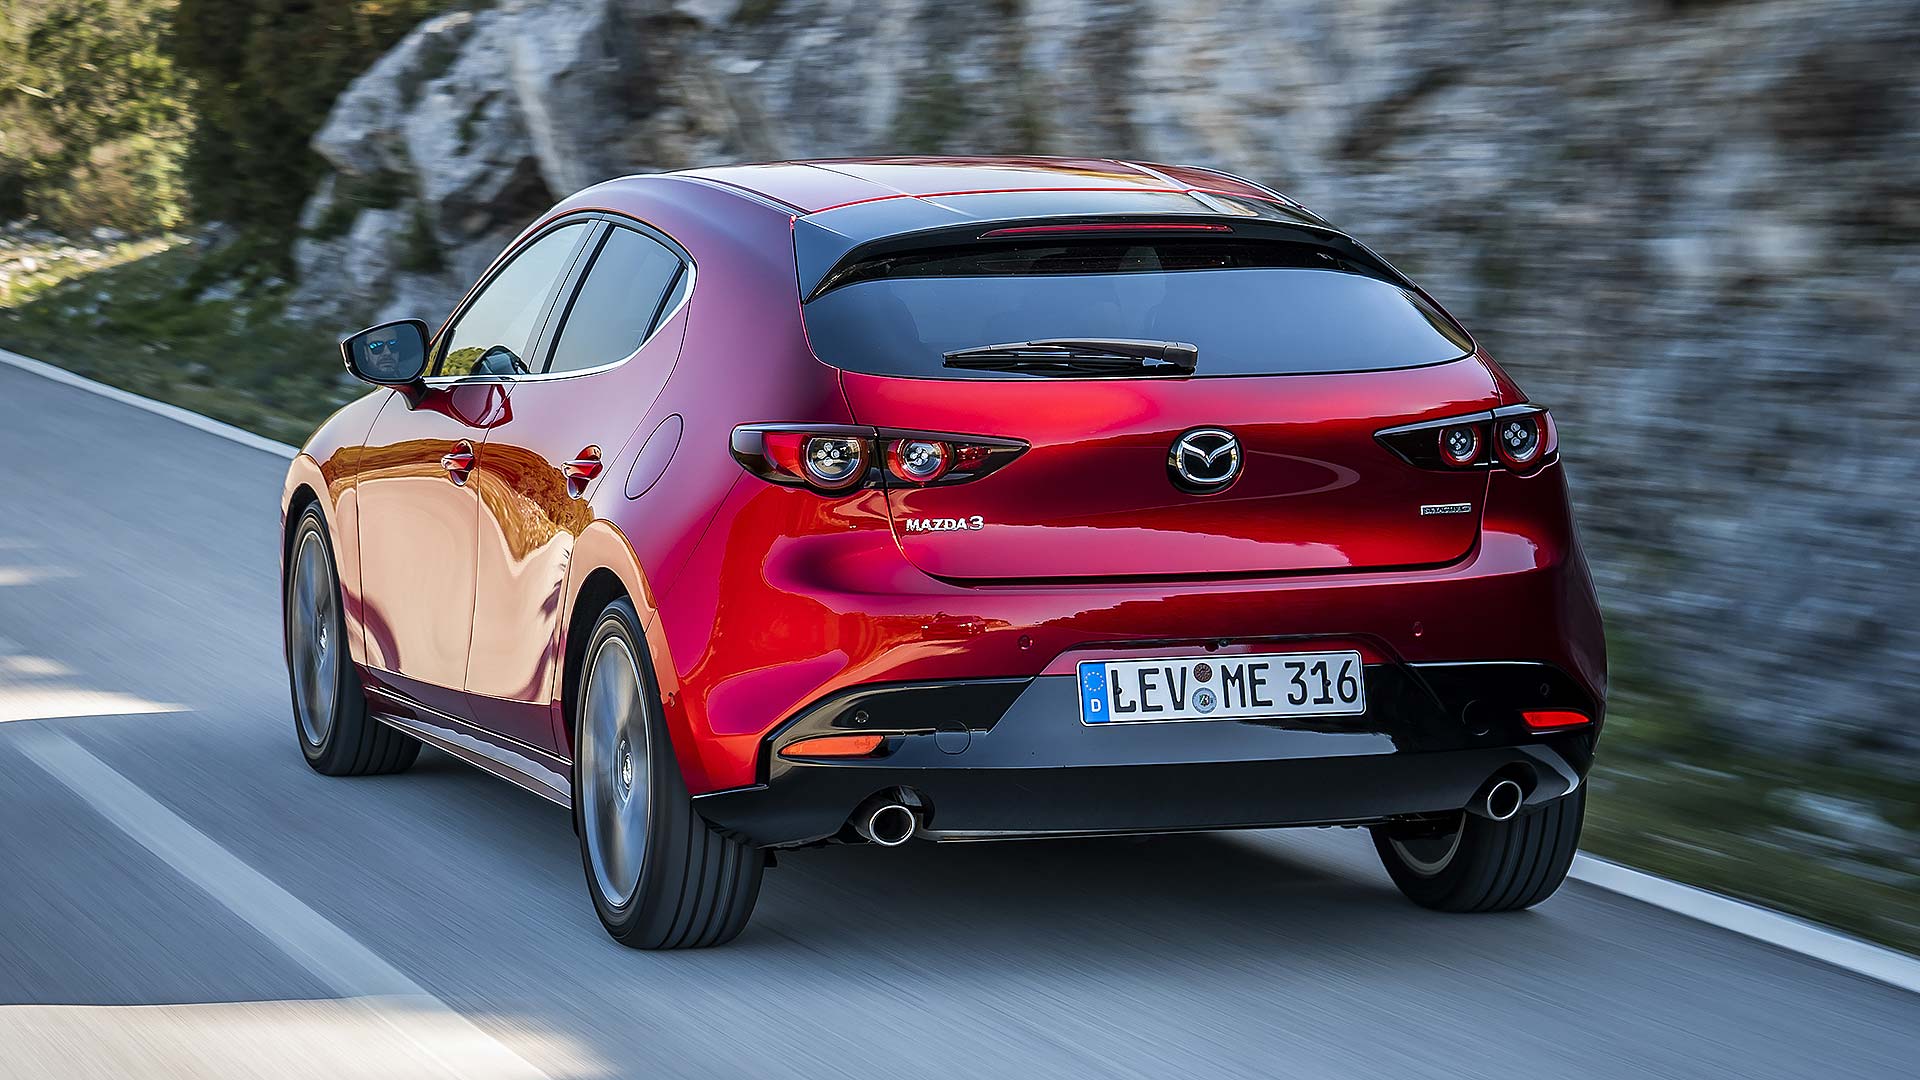 New 2019 Mazda 3 prices, specs and UK launch date revealed - Motoring ...